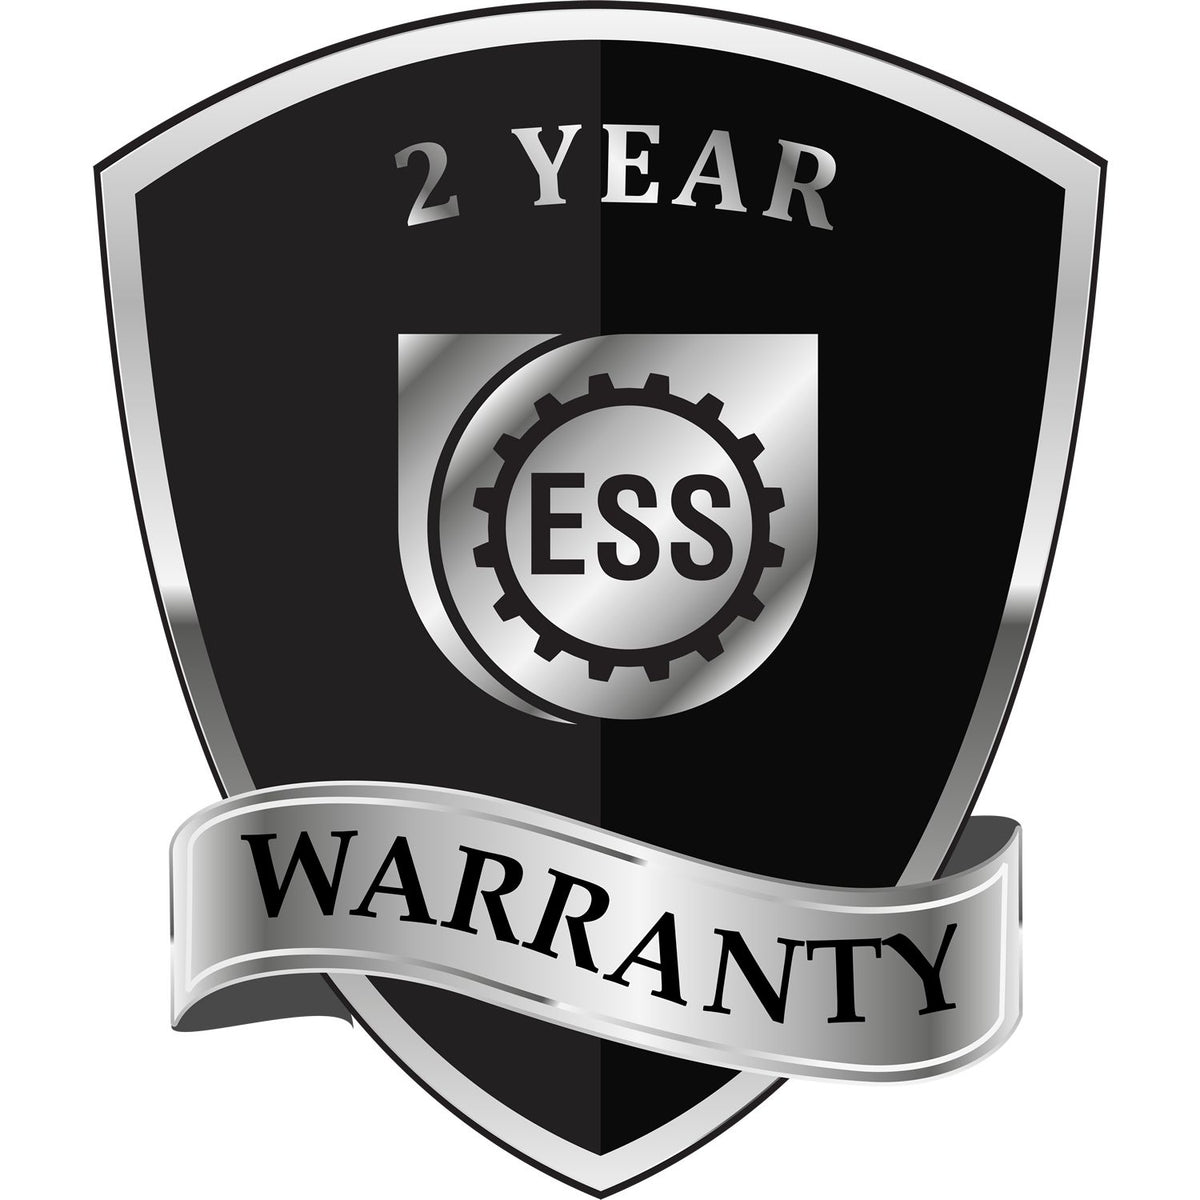 A badge or emblem showing a warranty icon for the Long Reach Michigan Land Surveyor Seal